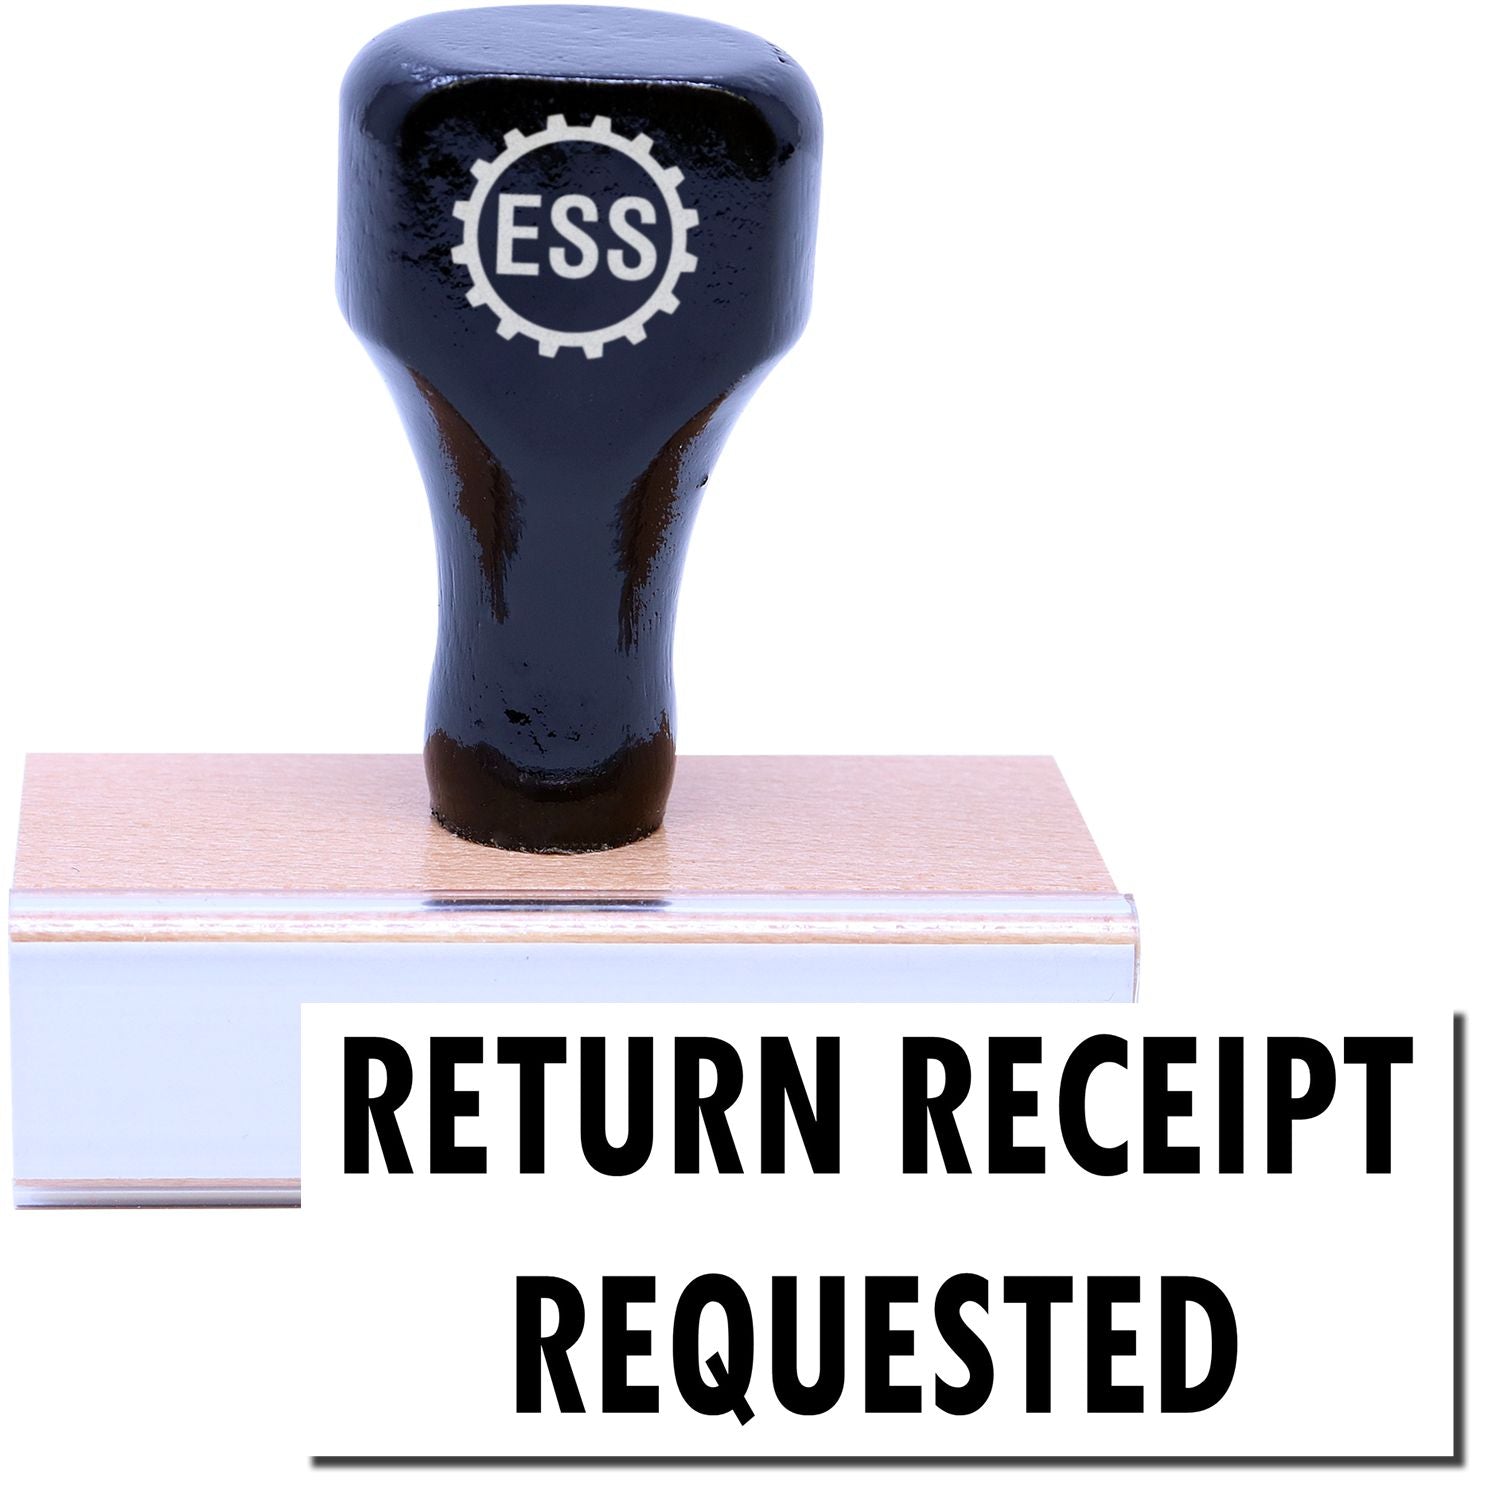 A stock office rubber stamp with a stamped image showing how the text "RETURN RECEIPT REQUESTED" is displayed after stamping.